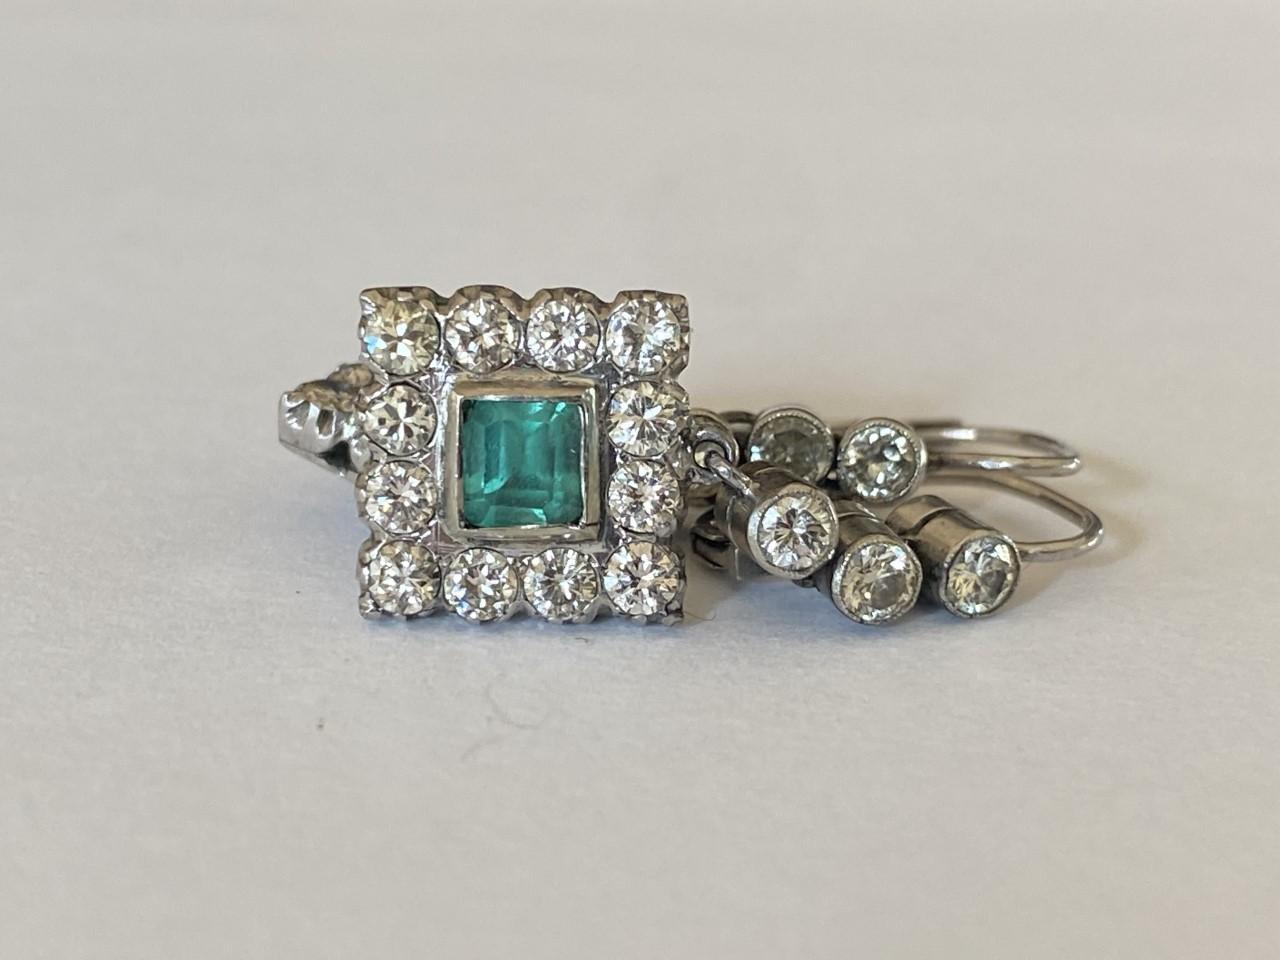 A pair of vintage drop down earrings each feature a natural green Colombian emerald-cut emerald at the center surrounded by a halo of Old European cut diamonds totaling approximately 1.50 carats, F color, VS2 clarity and fashioned in 18kt white